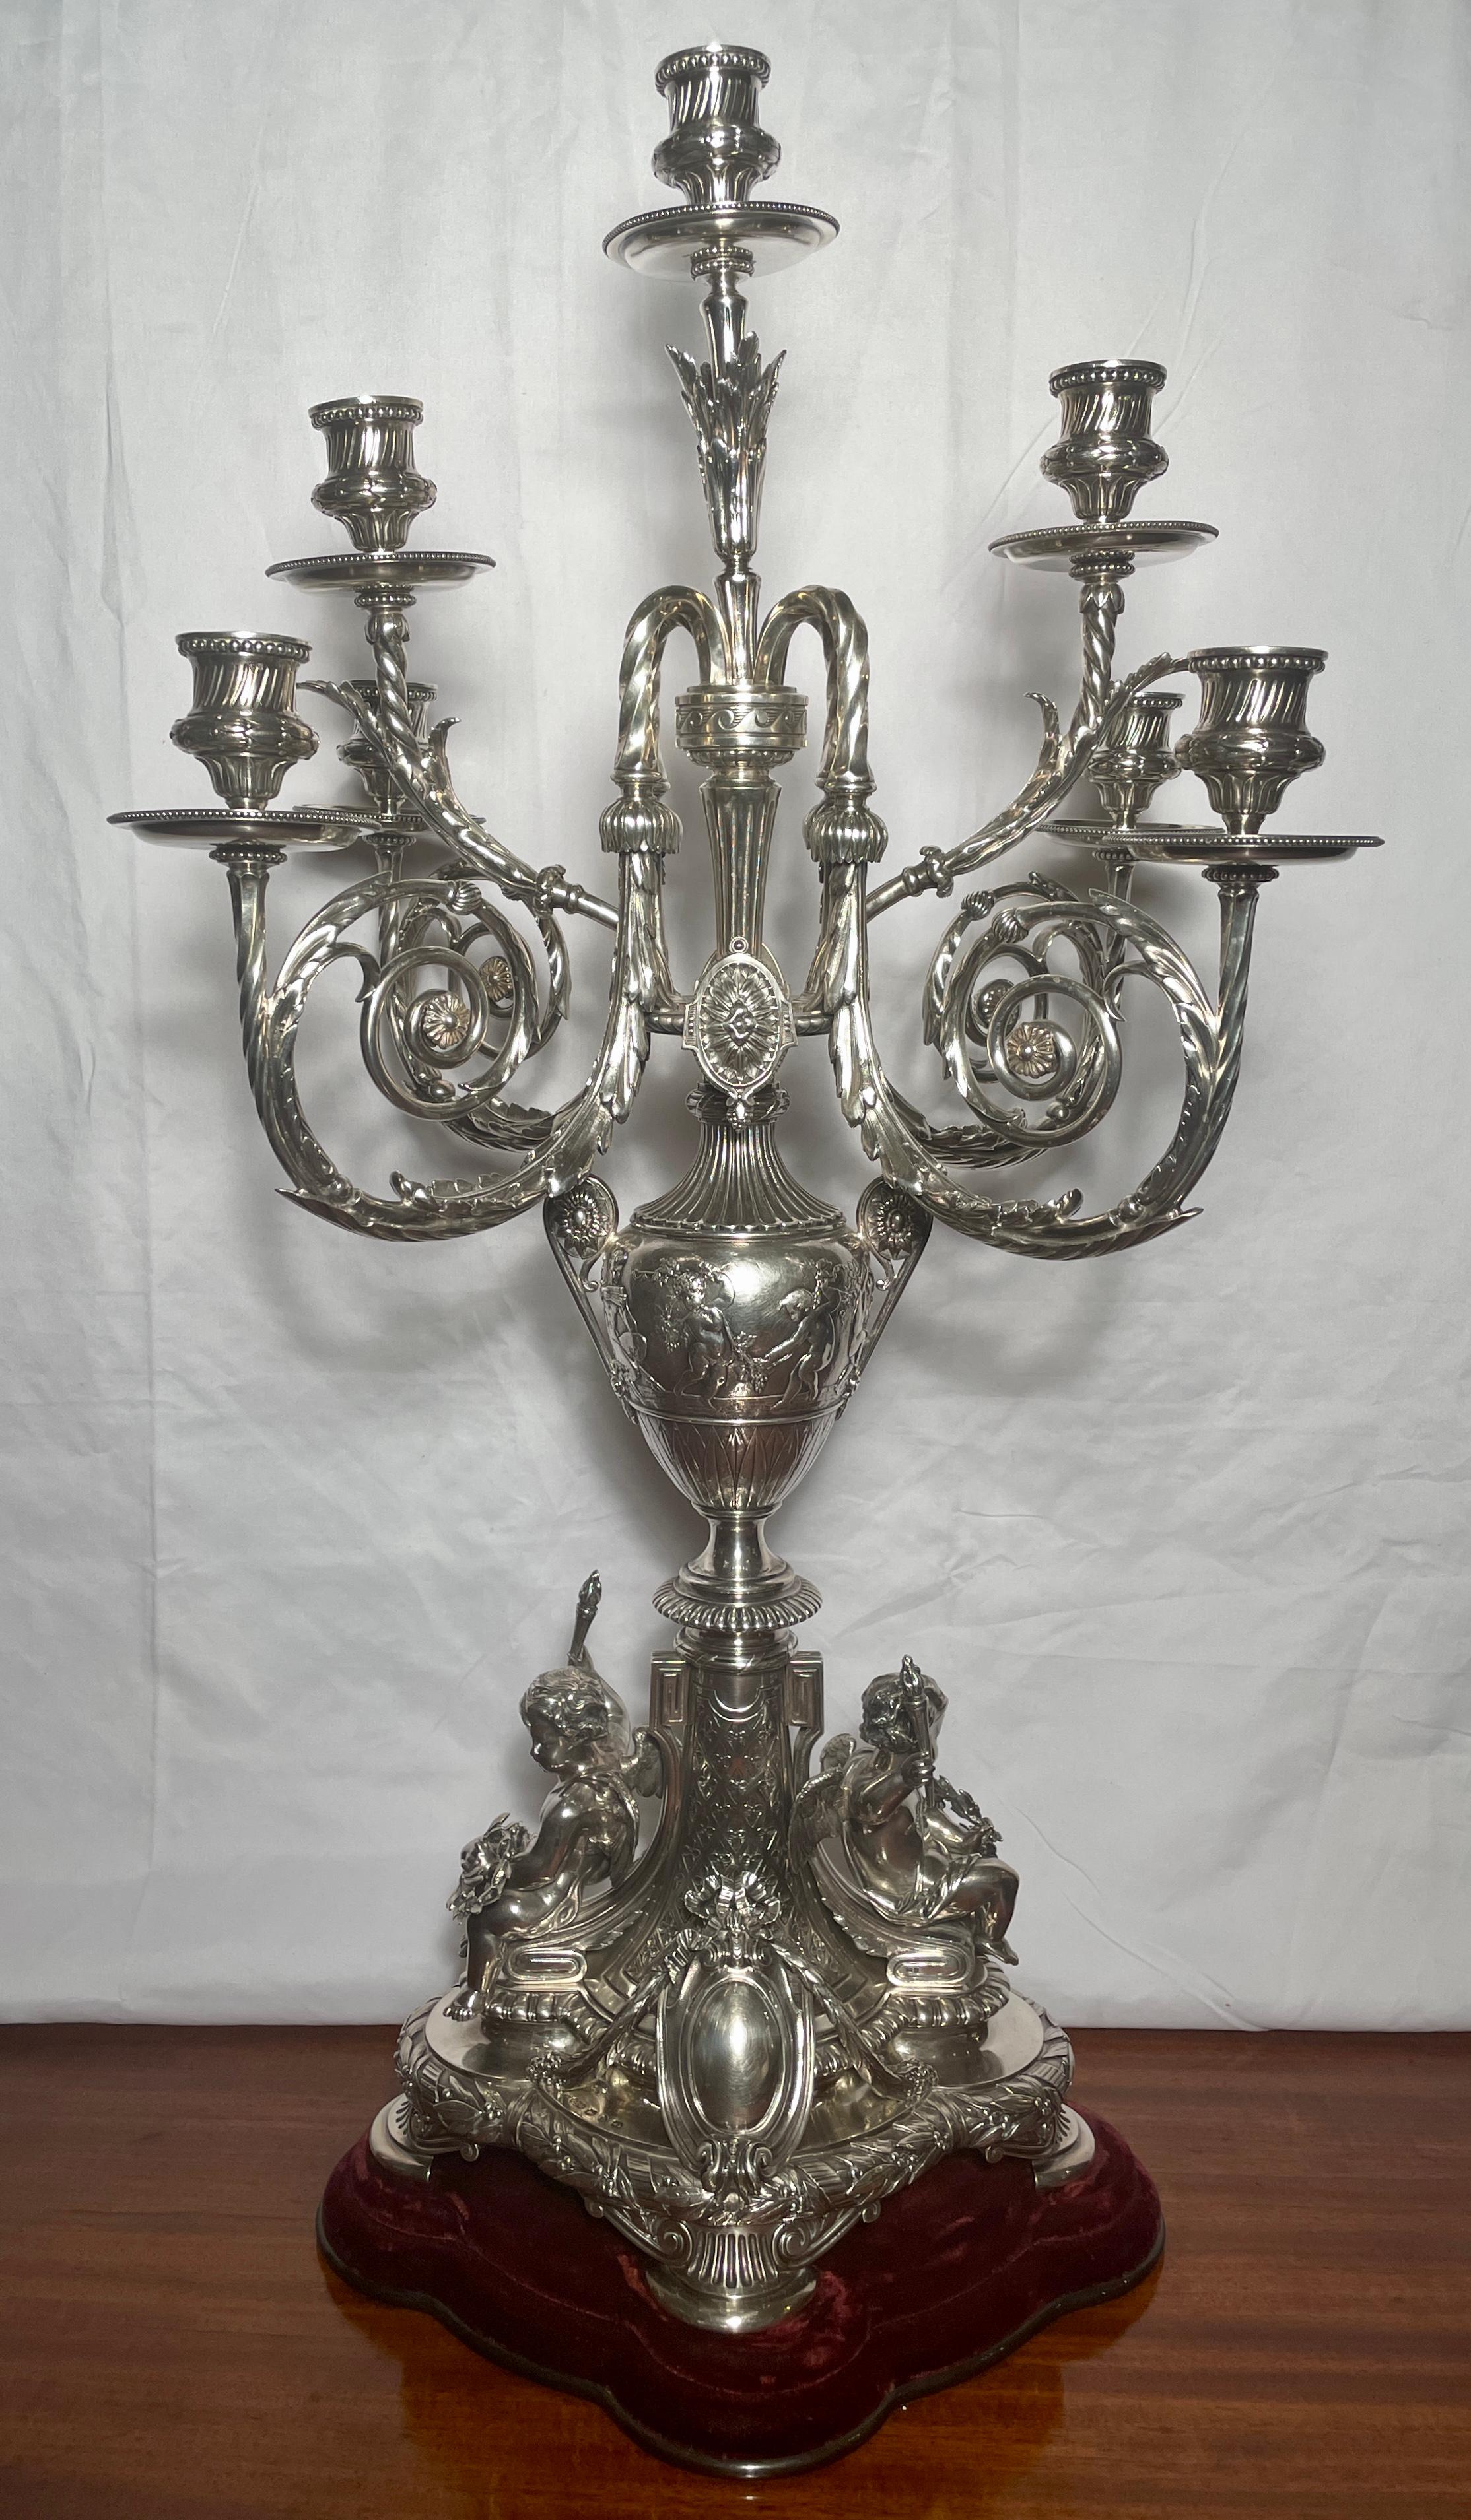 Rare pair of antique English solid sterling silver 8-light candelabra hallmarked Elkington, dated 1889. 
These were a Royal Wedding Gift to Constantine I, the Duke of Sparta (and Later King of Greece) upon his royal wedding to Queen Victoria's